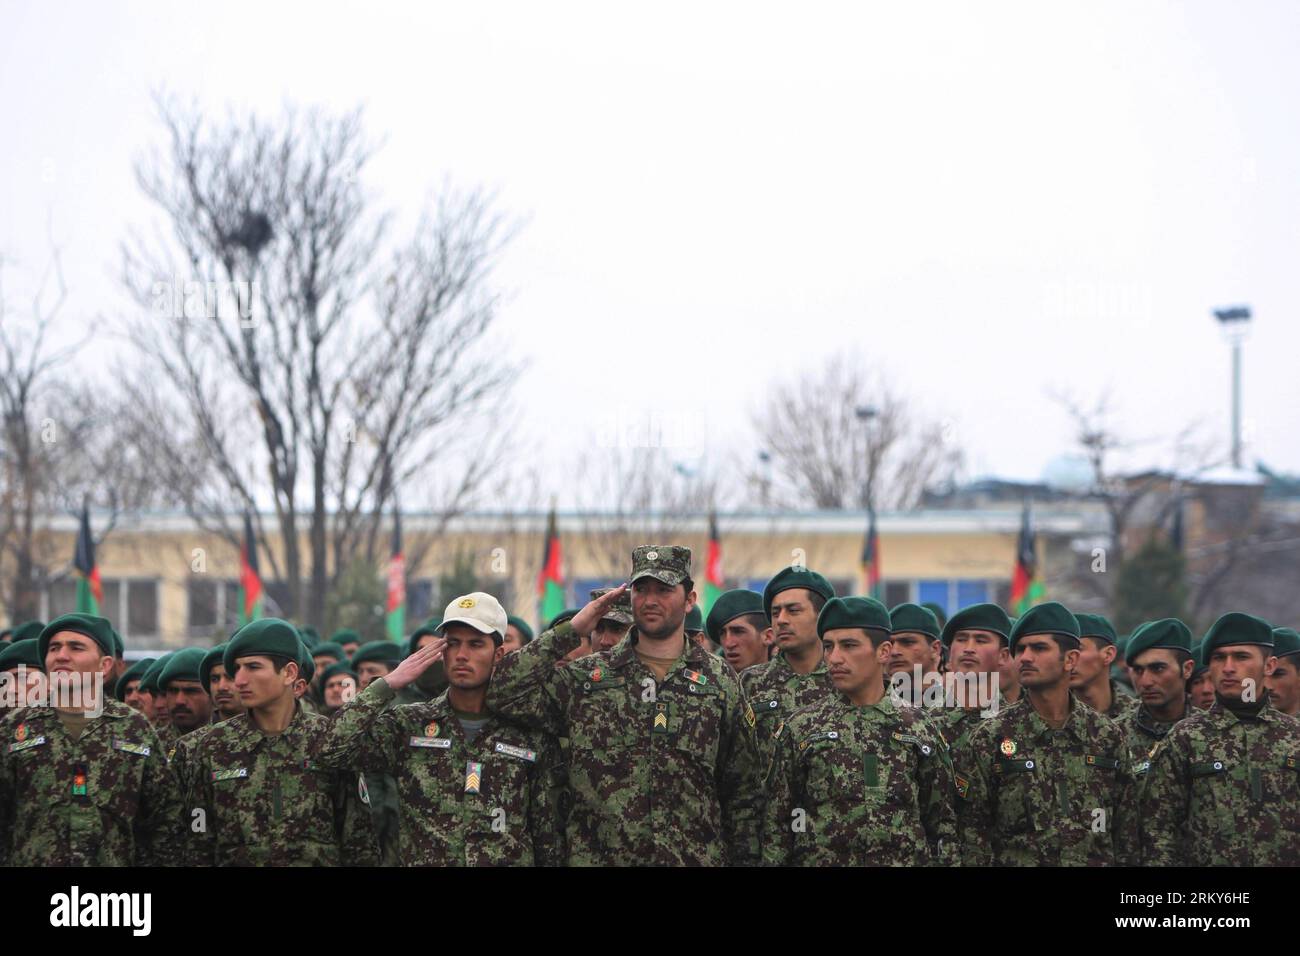 Bildnummer: 59155821  Datum: 31.01.2013  Copyright: imago/Xinhua (130131) -- KABUL, Jan. 31, 2013 (Xinhua) -- Newly graduated soldiers attend their graduation ceremony at the Kabul Military Training Center in Kabul, Afghanistan, on Jan. 31, 2013. A total of 1,400 soldiers graduated from Kabul Military Training Center (KMTC) on Thursday and were commissioned to Afghan National Army (ANA), General Aminullah Patyannai commander of KMTC said. (Xinhua/Ahmad Massoud) AFGHANISTAN-KABUL-SOLDIERS-GRADUATION PUBLICATIONxNOTxINxCHN Gesellschaft Militär Armee Soldat Ausbildung Militärausbildung Abschluss Stock Photo